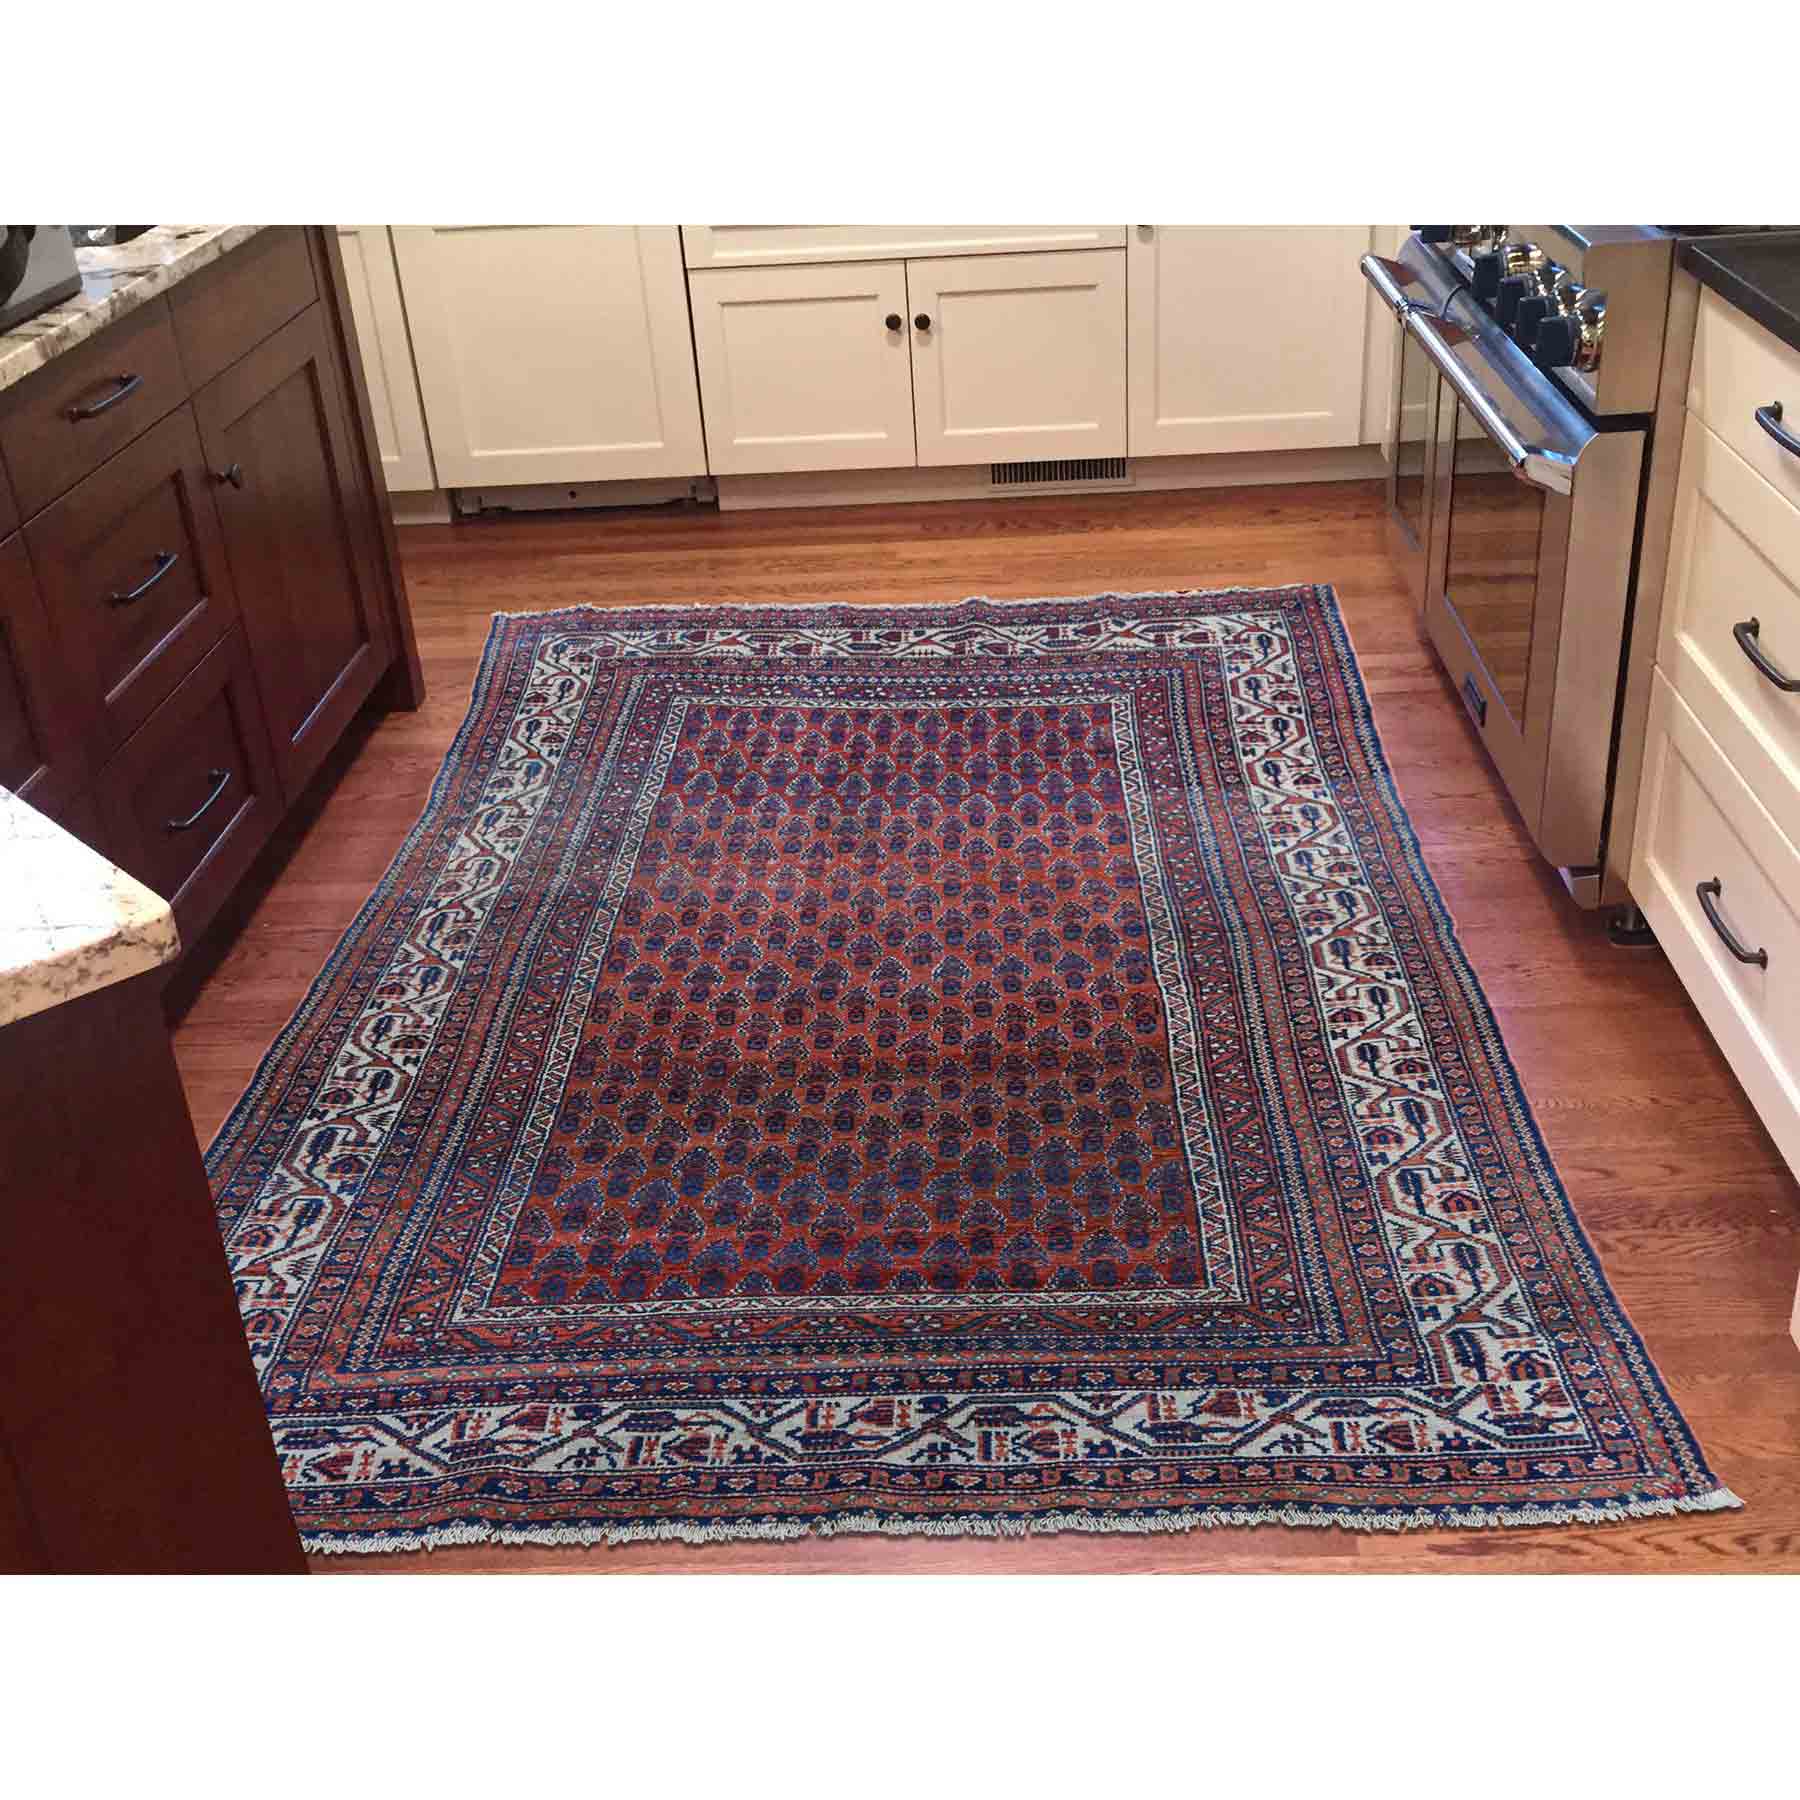 Antique-Hand-Knotted-Rug-230975